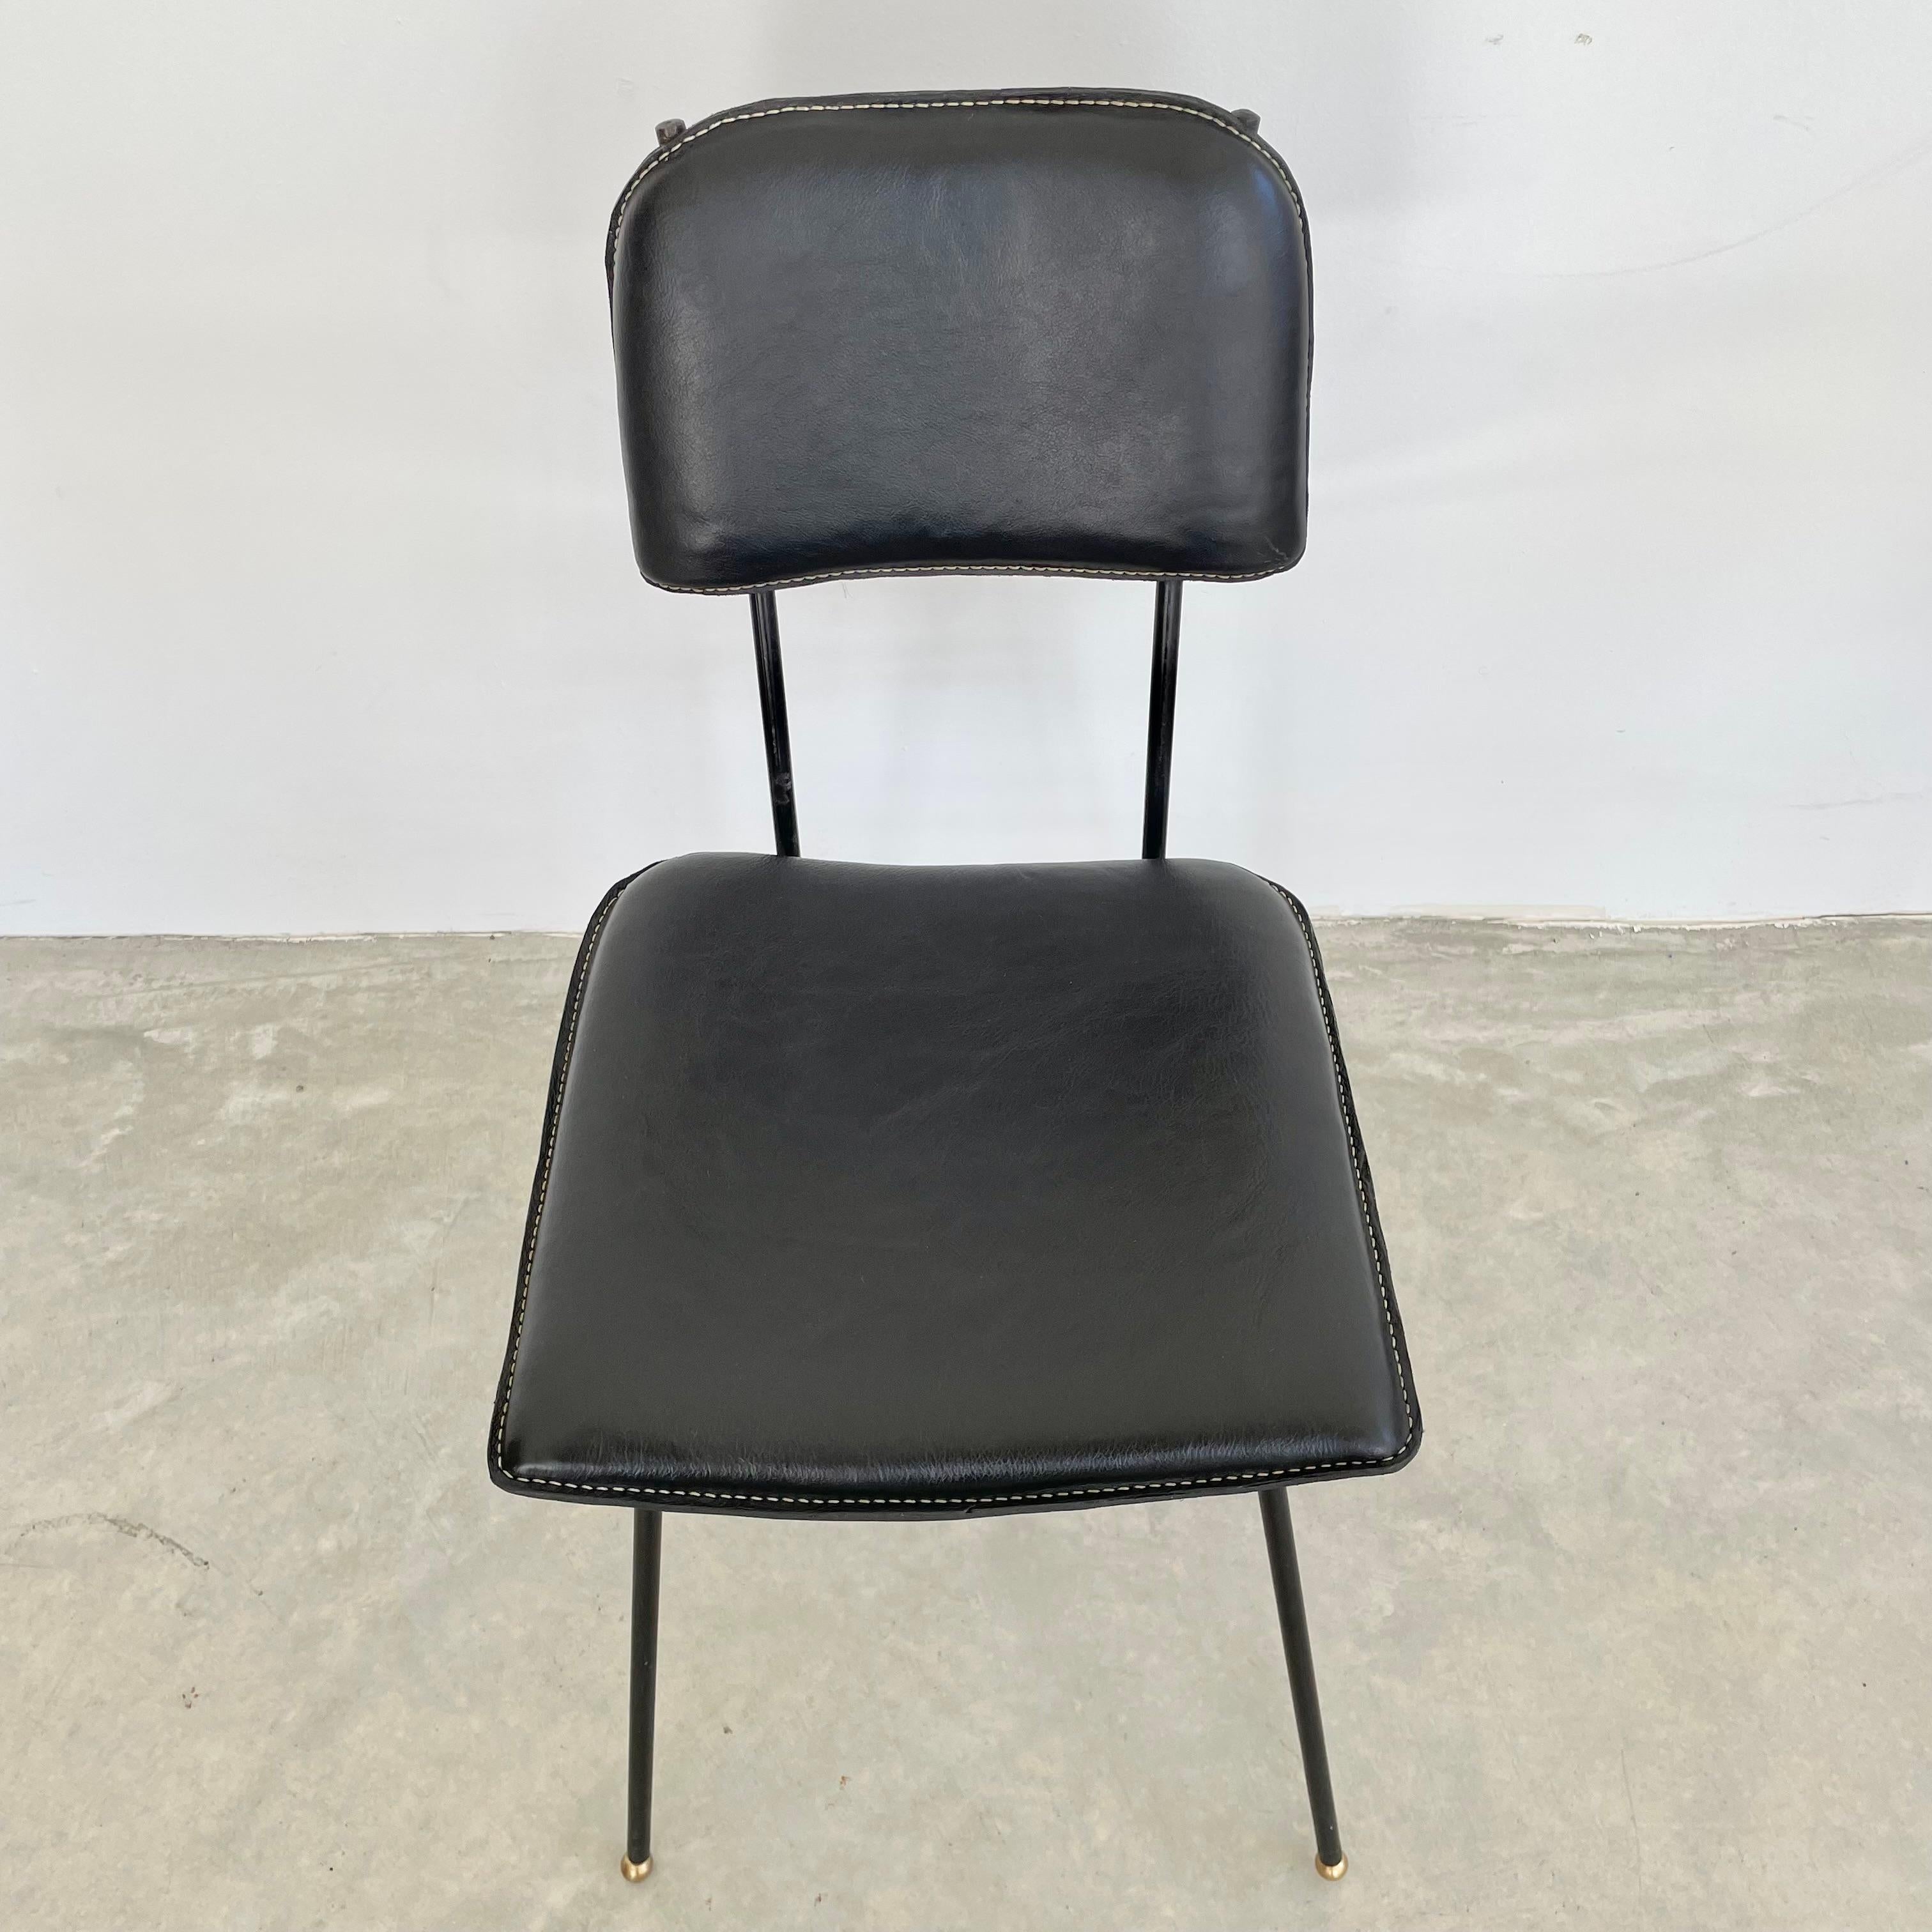 Art Deco Jacques Adnet Black Leather Chair, 1950s France For Sale